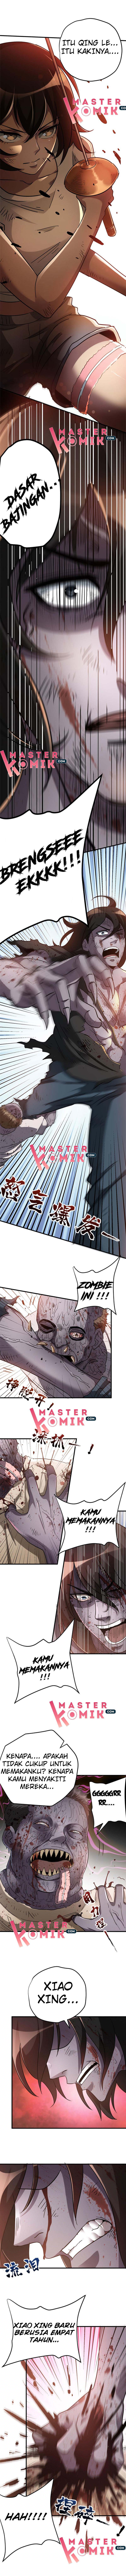 Strongest Evolution Of Zombie Chapter 7